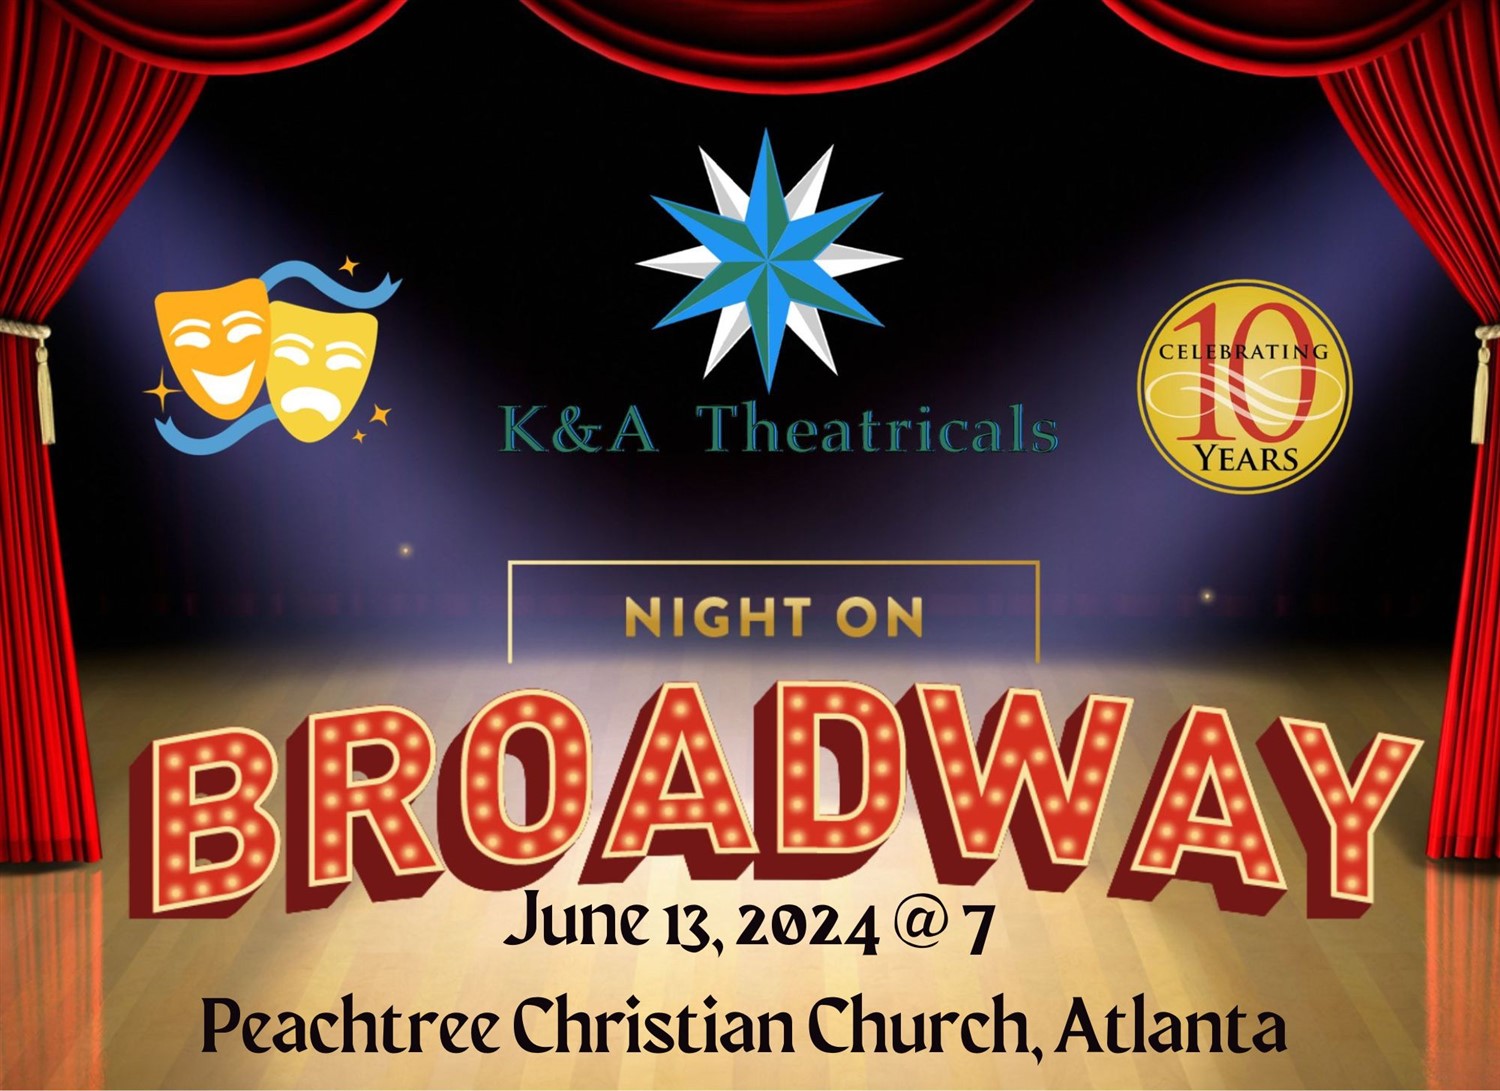 K&A Theatricals Night of Broadway Celebrating 10 Years of Broadway Performing Arts. A Benefit for the K&A Theatricals Scholarship Fund on juin 13, 19:00@Peachtree Christian Church - Achetez des billets et obtenez des informations surWww.kandatheatricals.com 